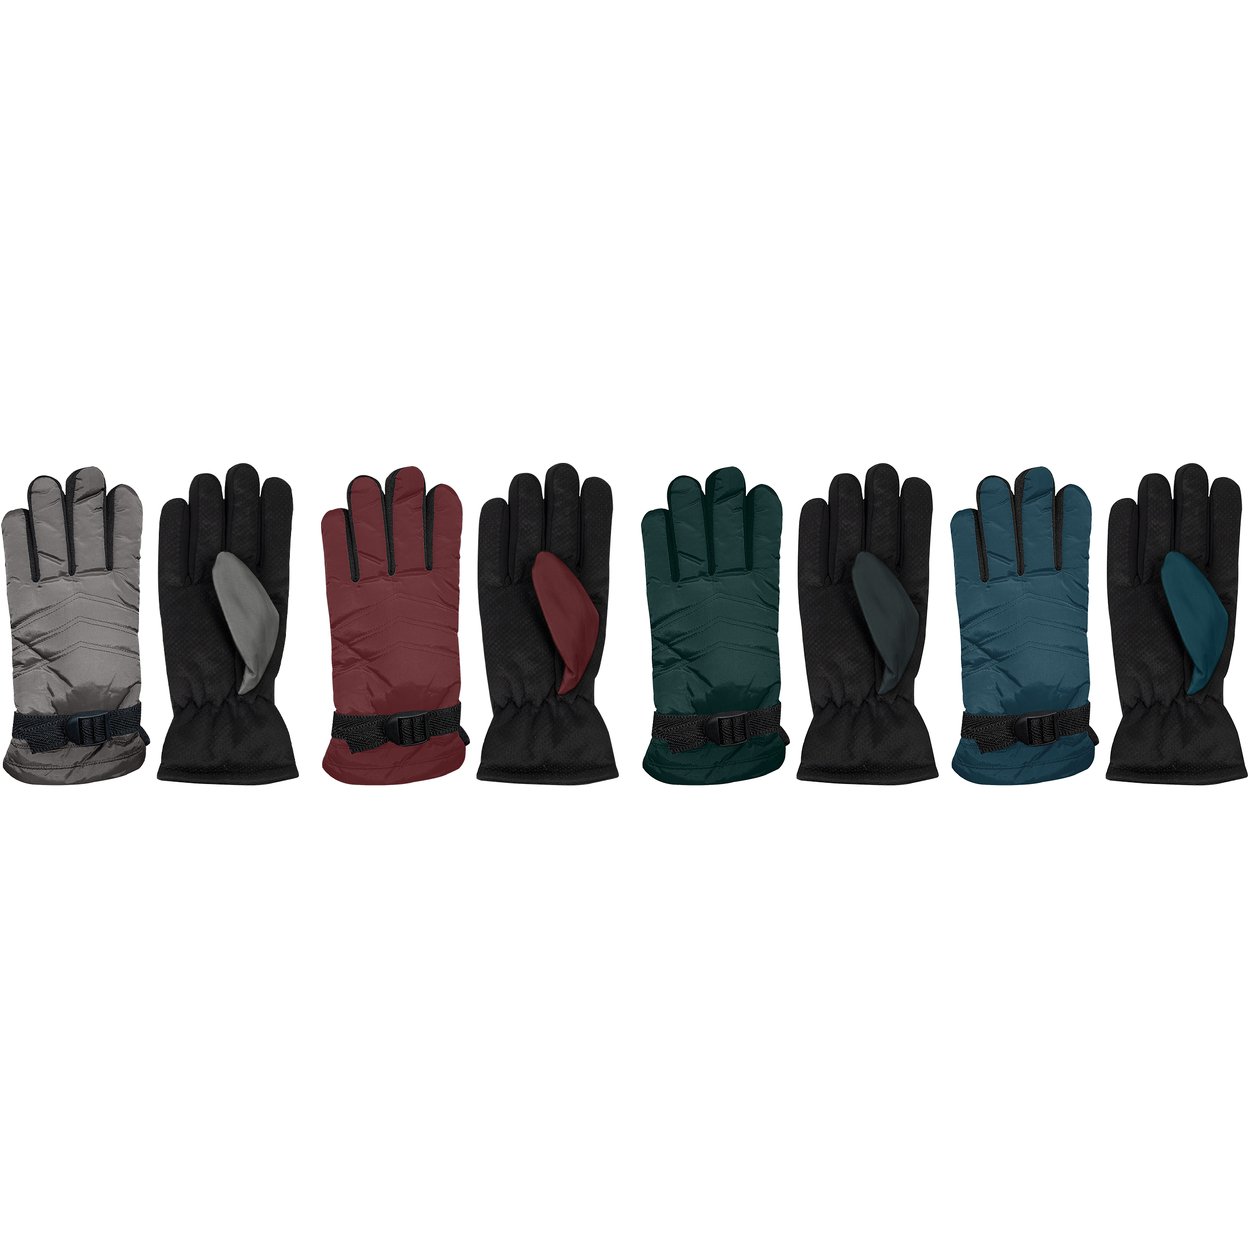 4-Pairs Women's Cozy Fur Lined Snow Ski Warm Winter Gloves - Assorted